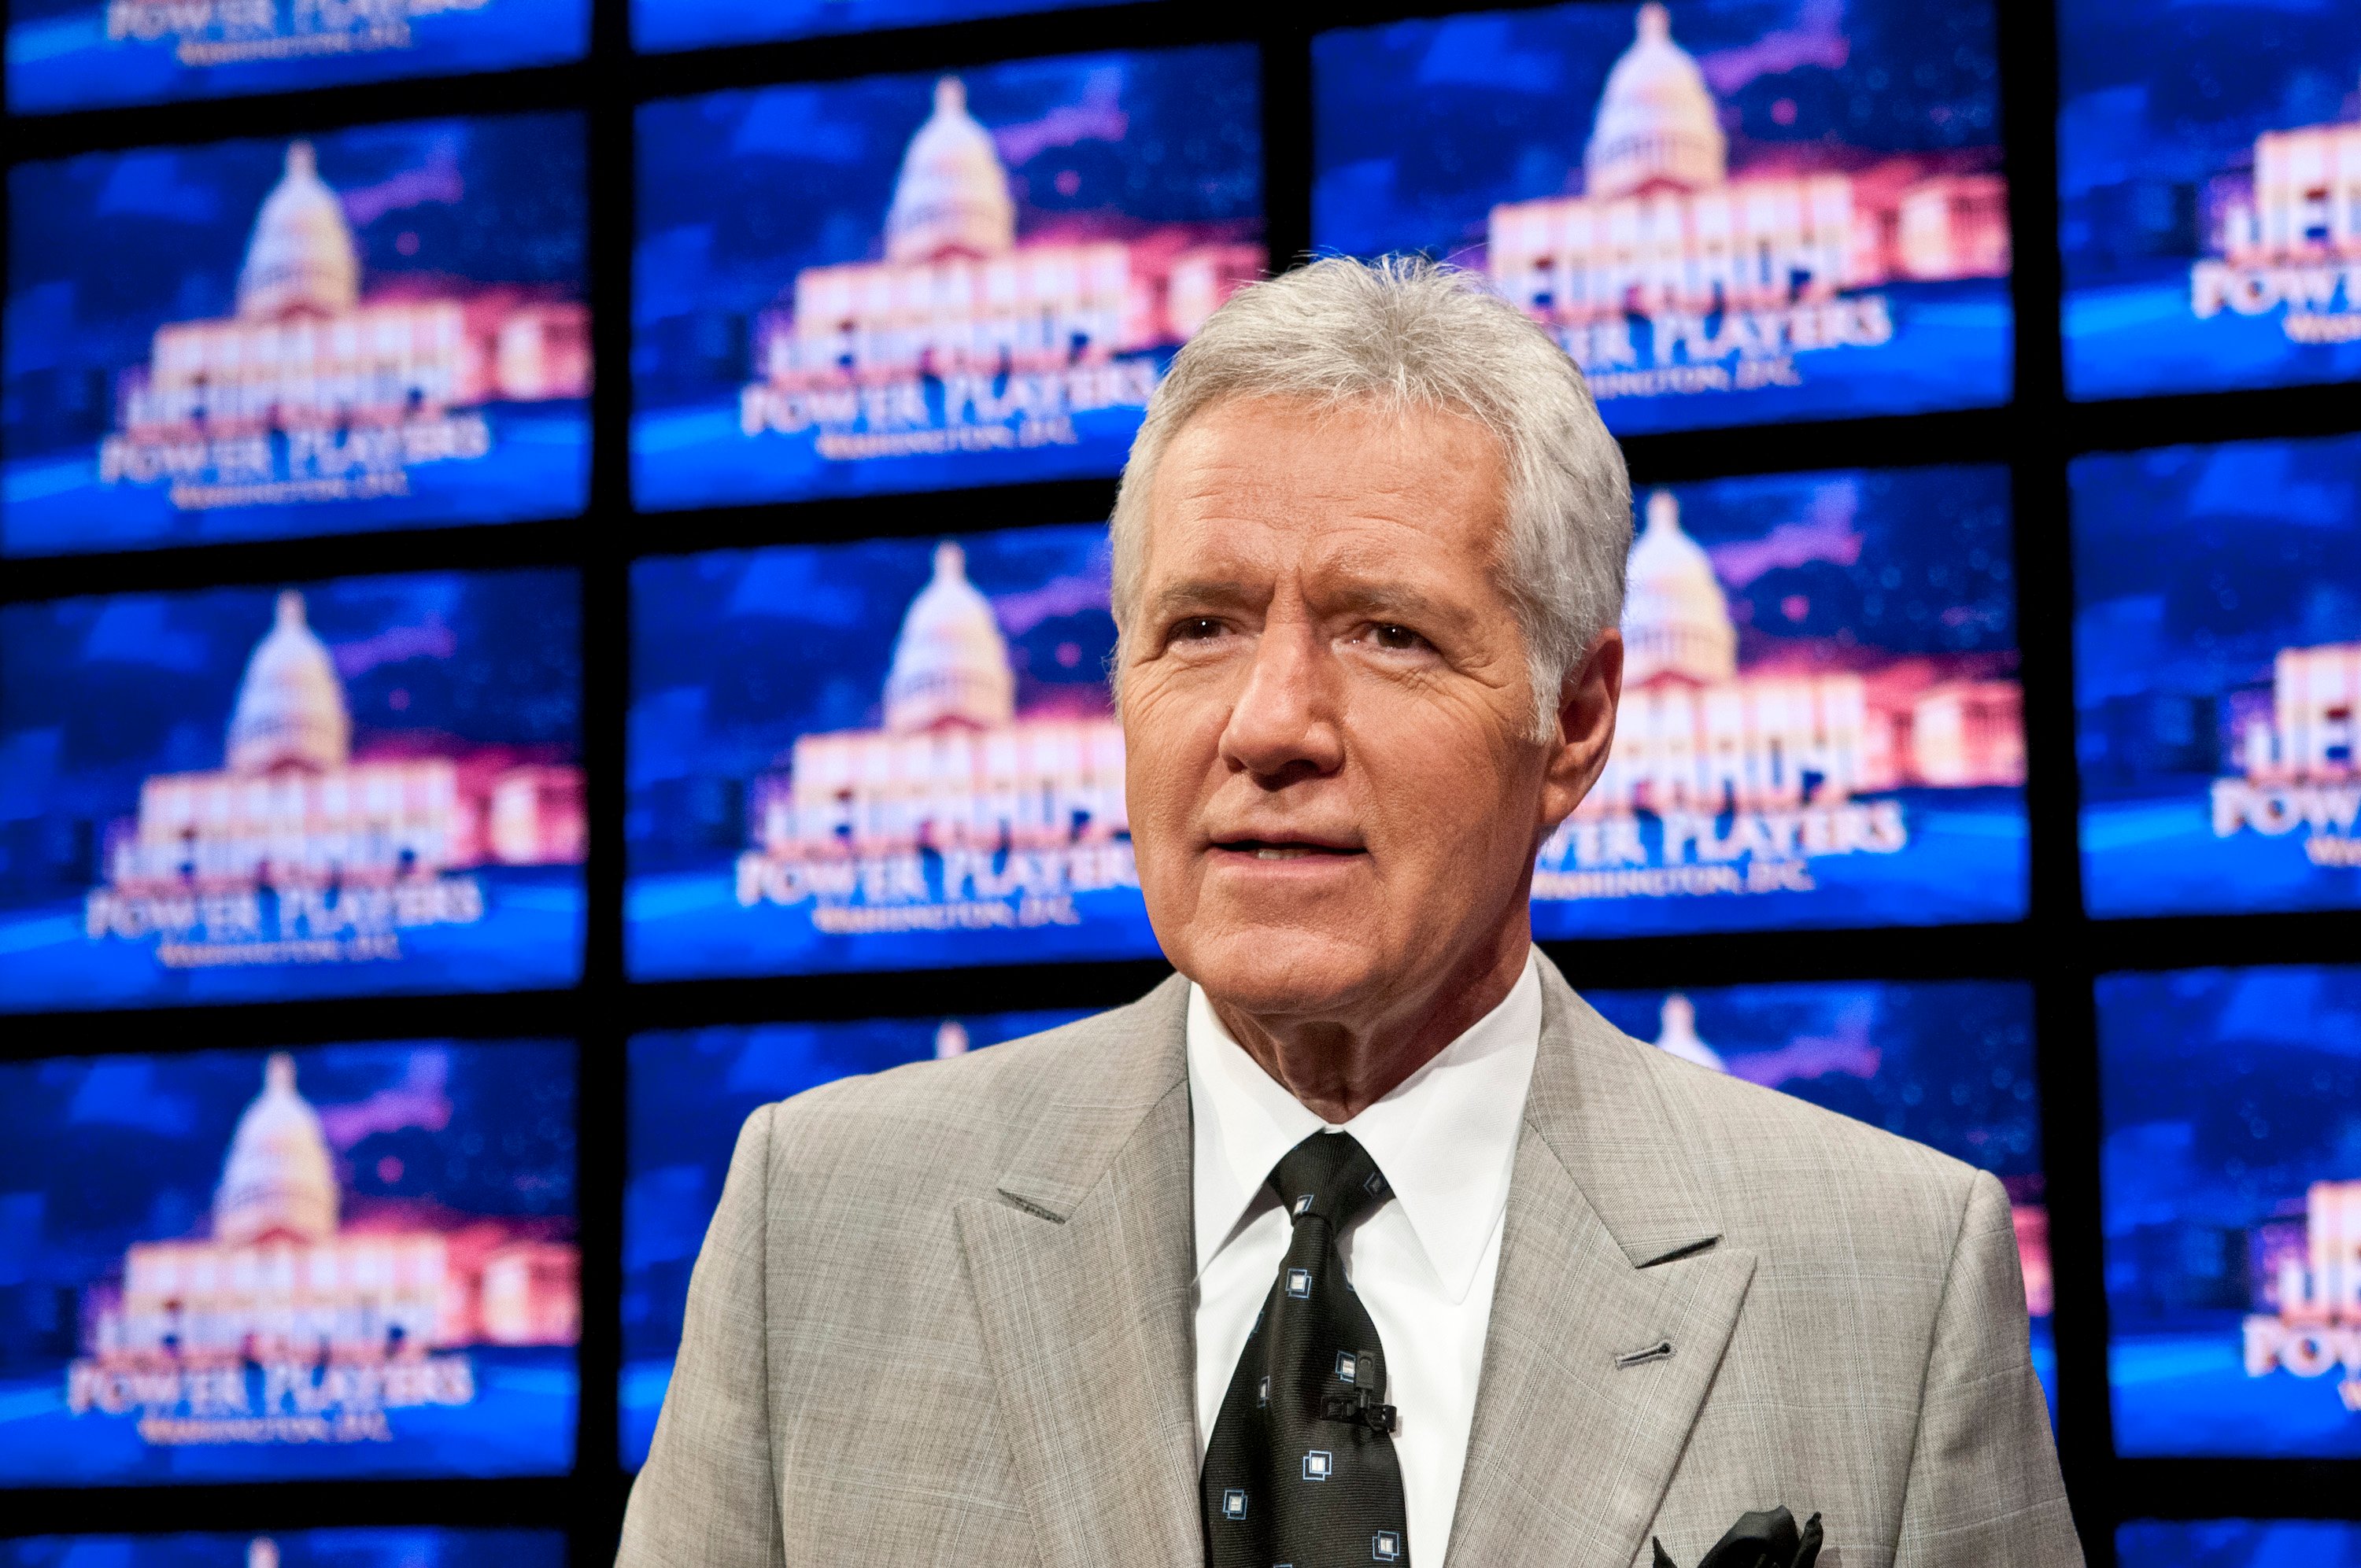 Alex Trebek Took the ‘Jeopardy!’ Contestant Test Annually ‘in His Early Years as Host’